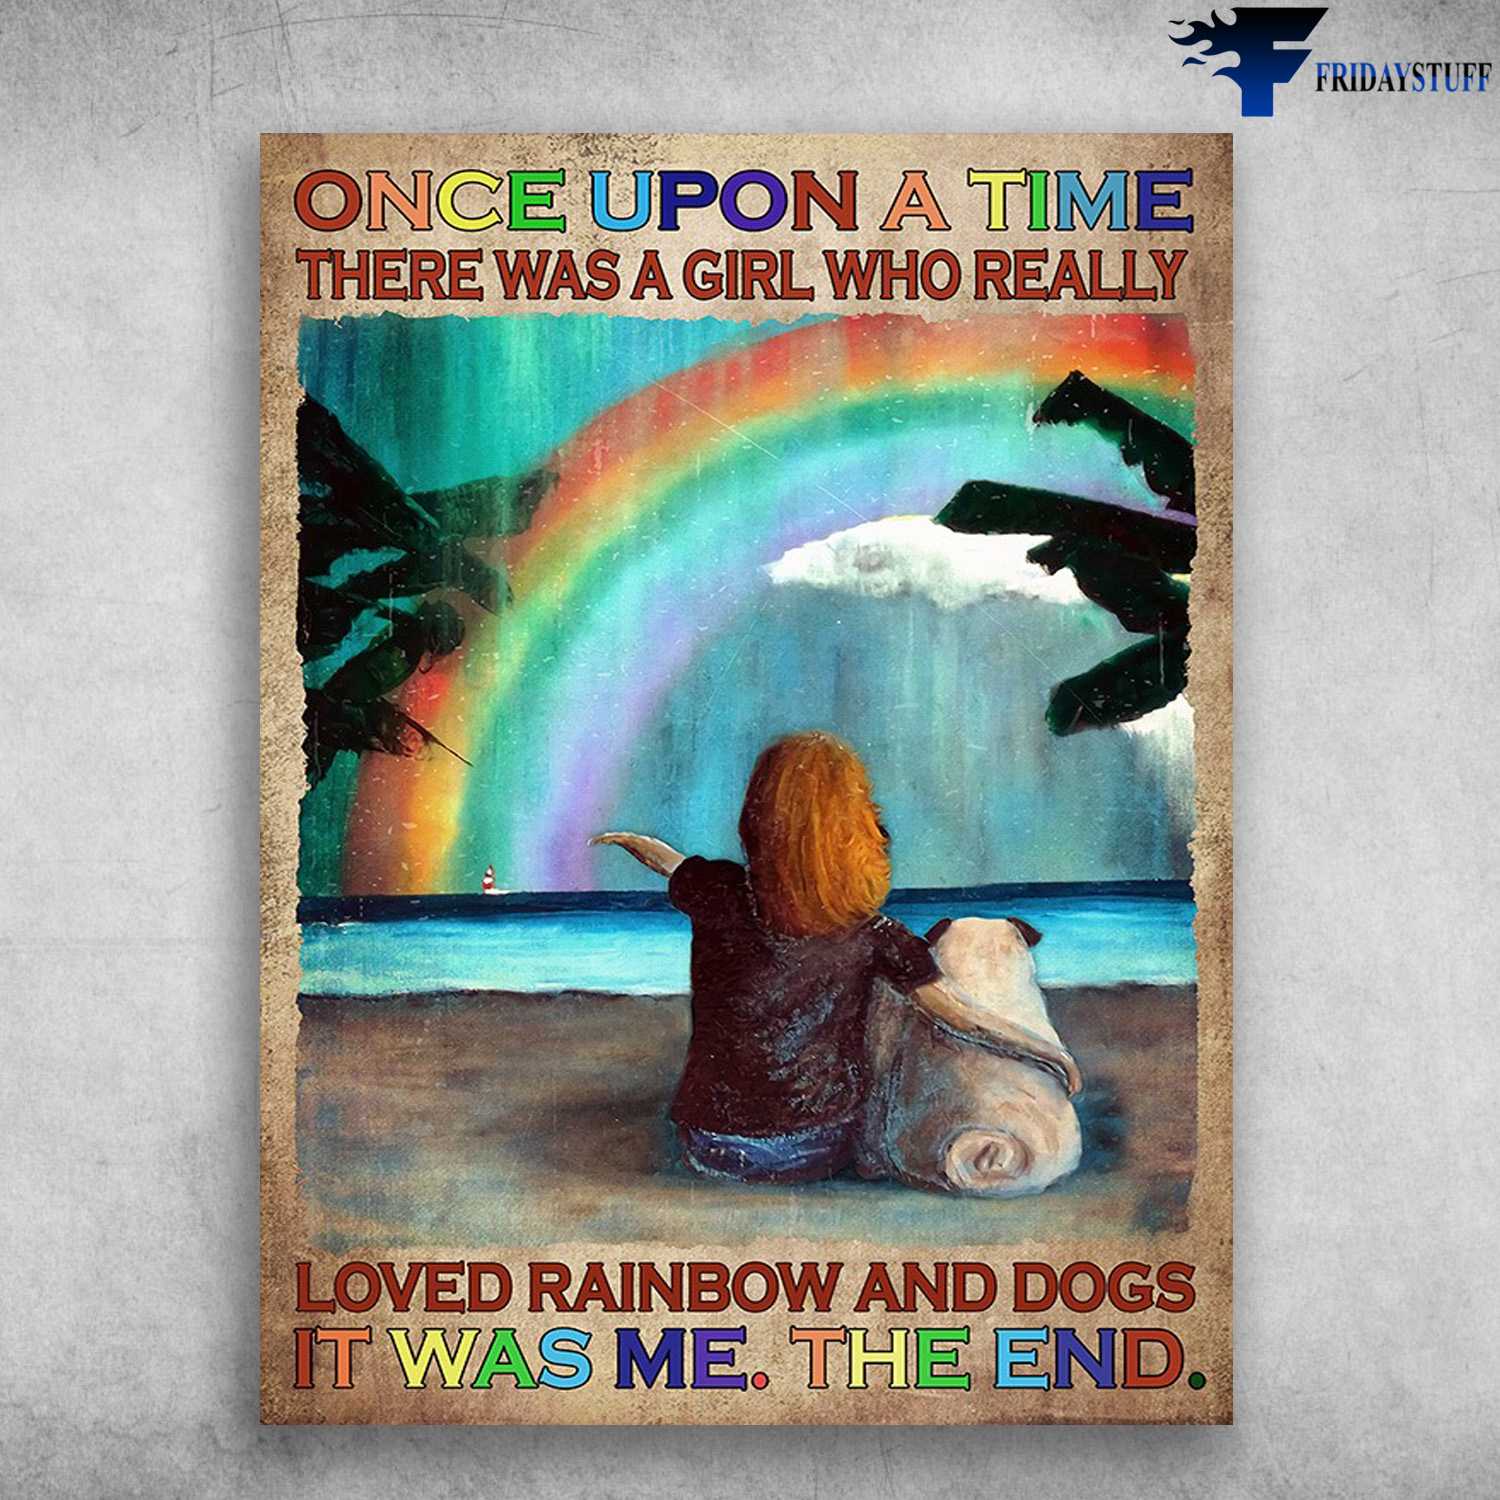 Dog Lover, Rainbow And Dogs - Once Upon A TIme, There Was A Girl, Who Really Loved Rainbow And Dogs, It Was Me, The End